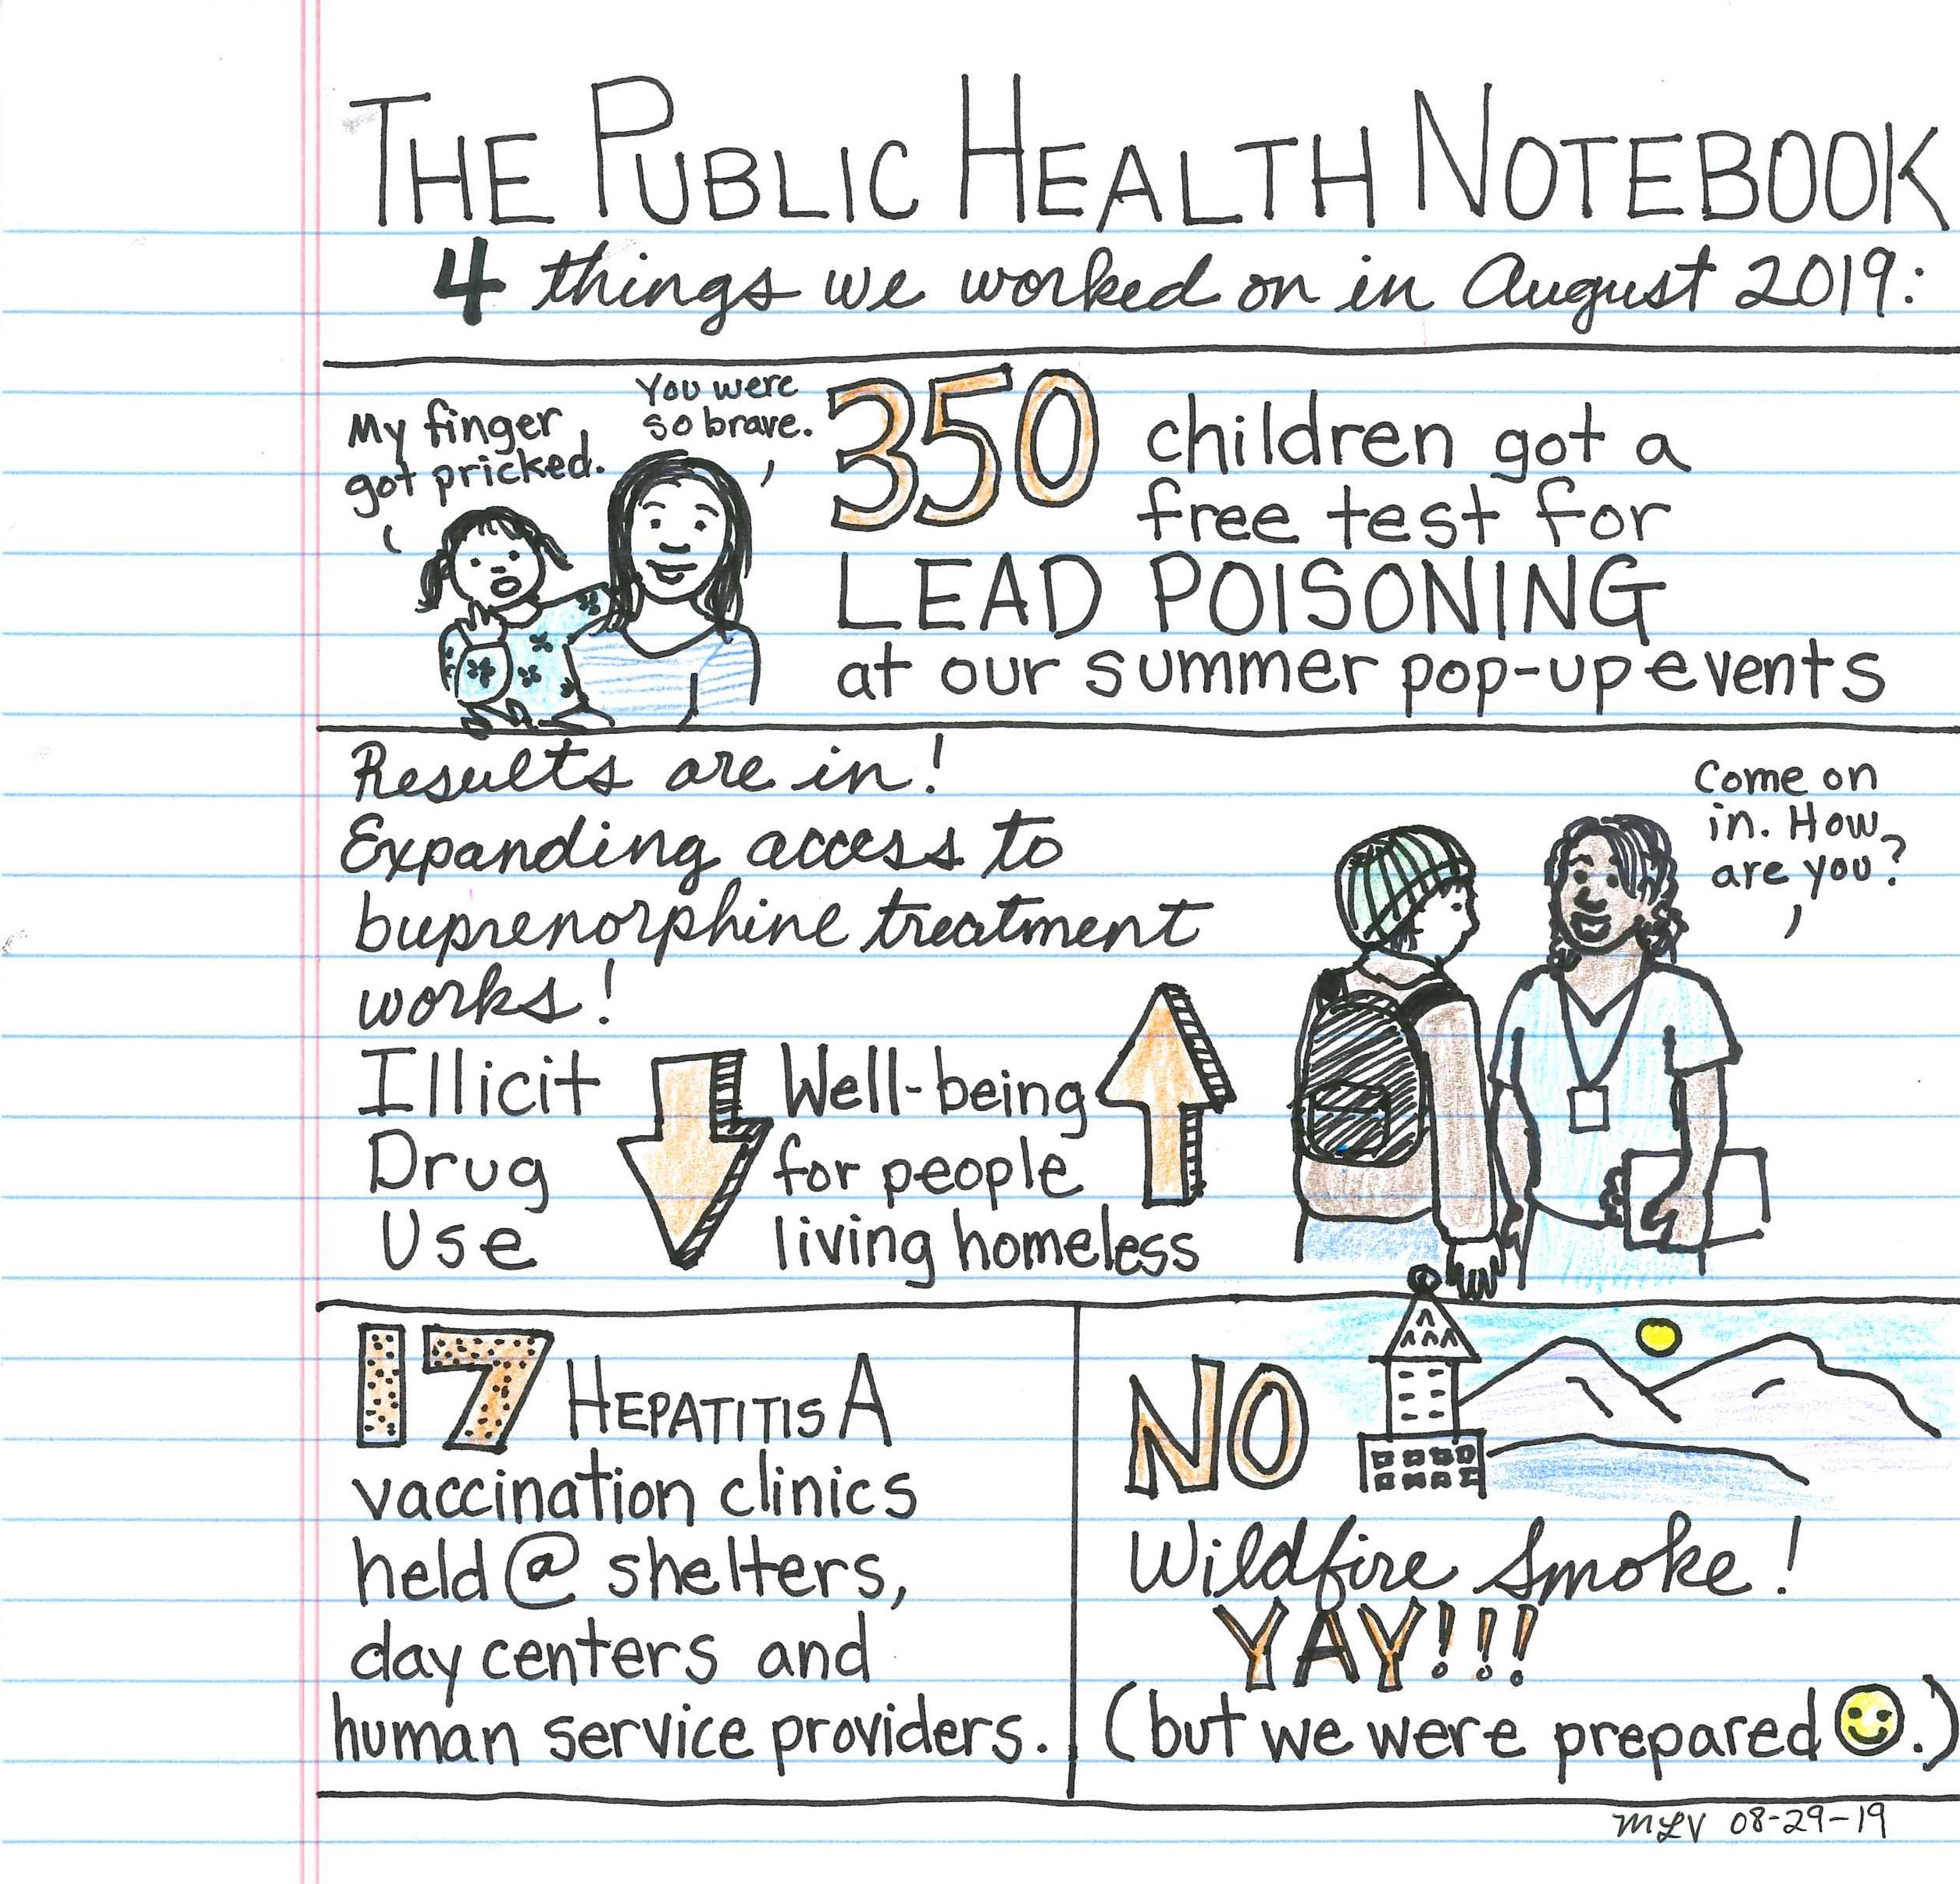 Comic page showing a public health notebook drawing